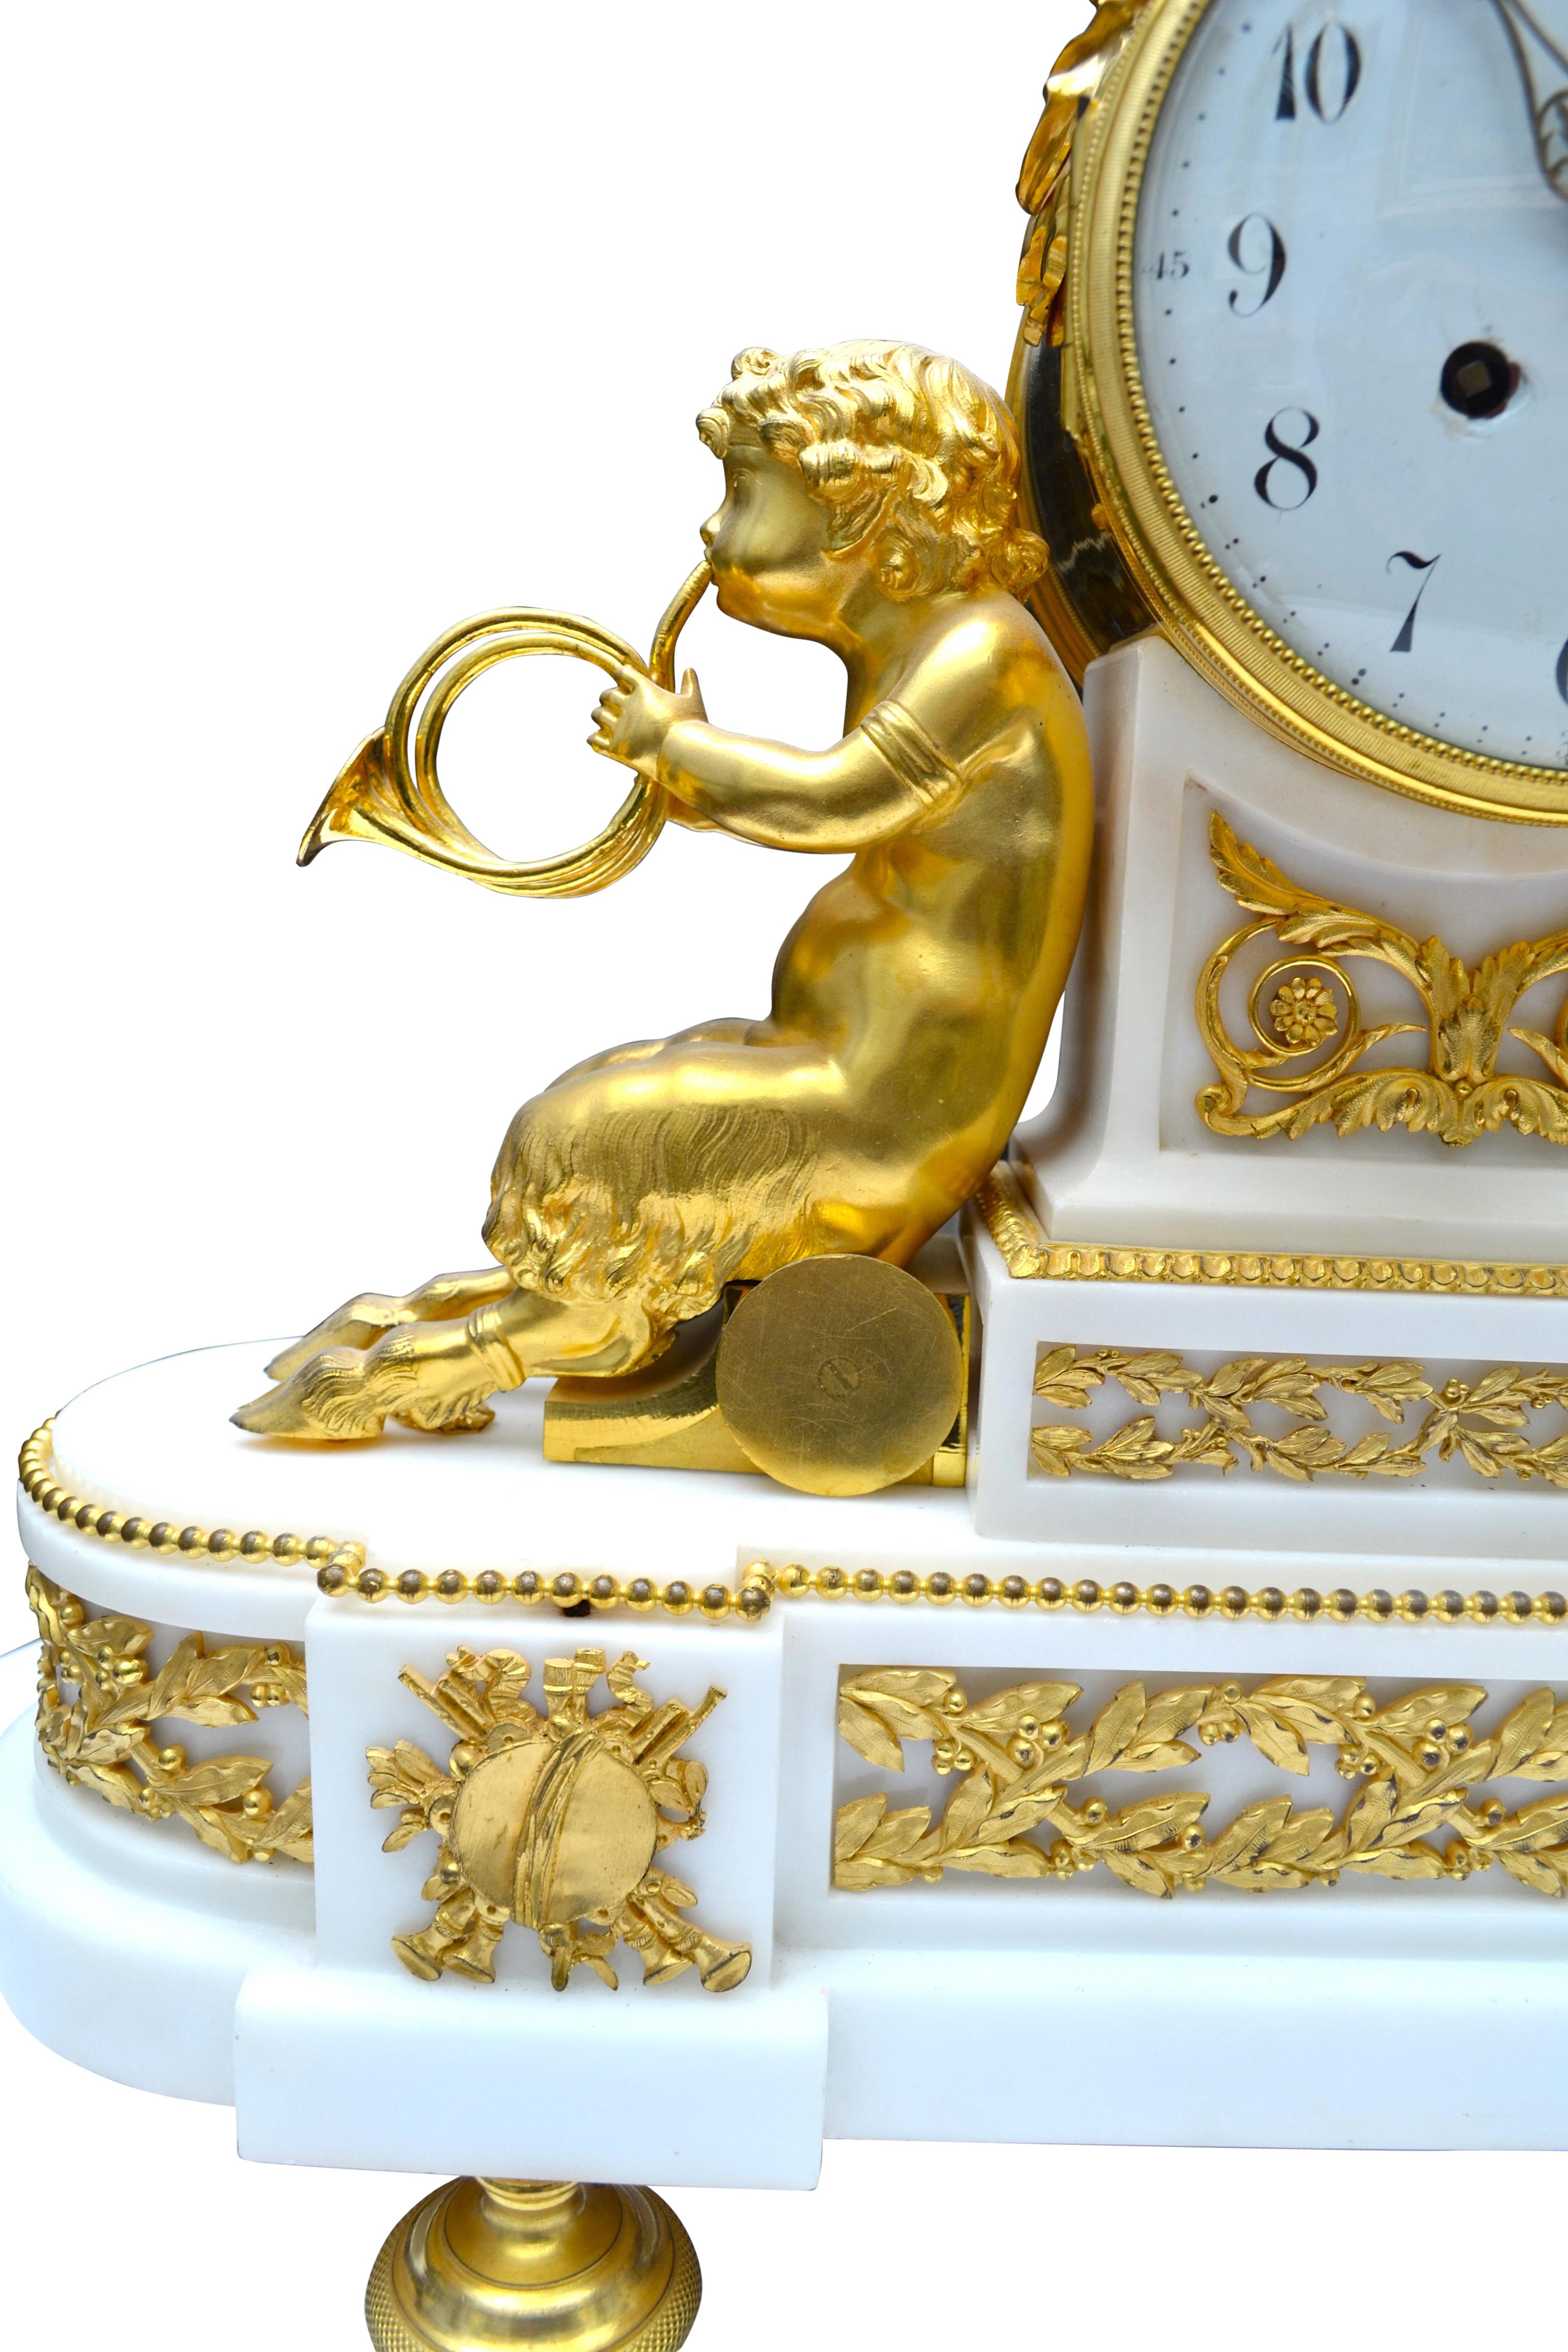 Louis XVI style clock with Bacchante and musical satyrs. The body of the clock features two young satyrs in gilded bronze each holding twin horns; they lean back against the shaped white marble clock plinth supporting the white enamel dial. Atop the